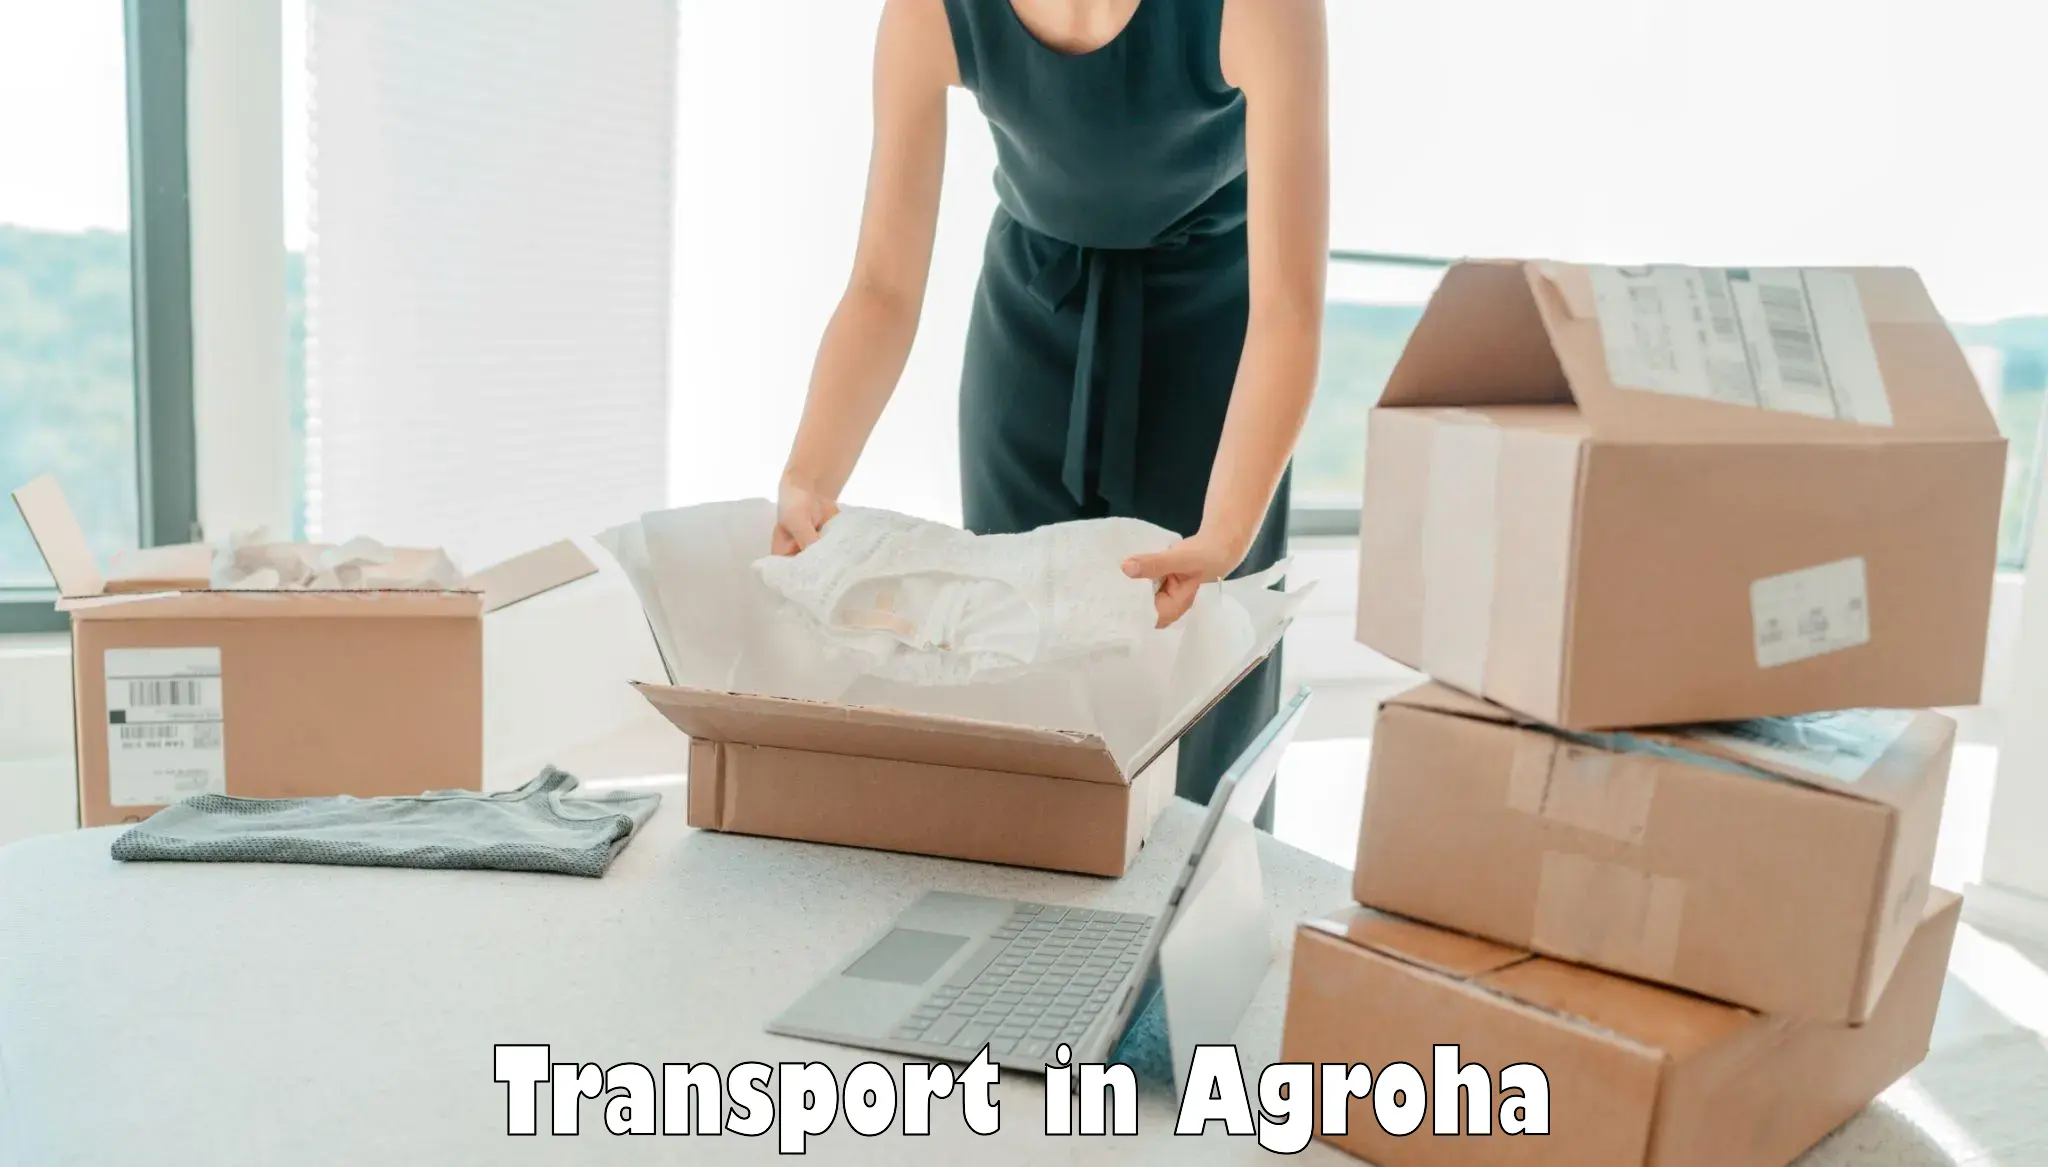 Cargo transport services in Agroha